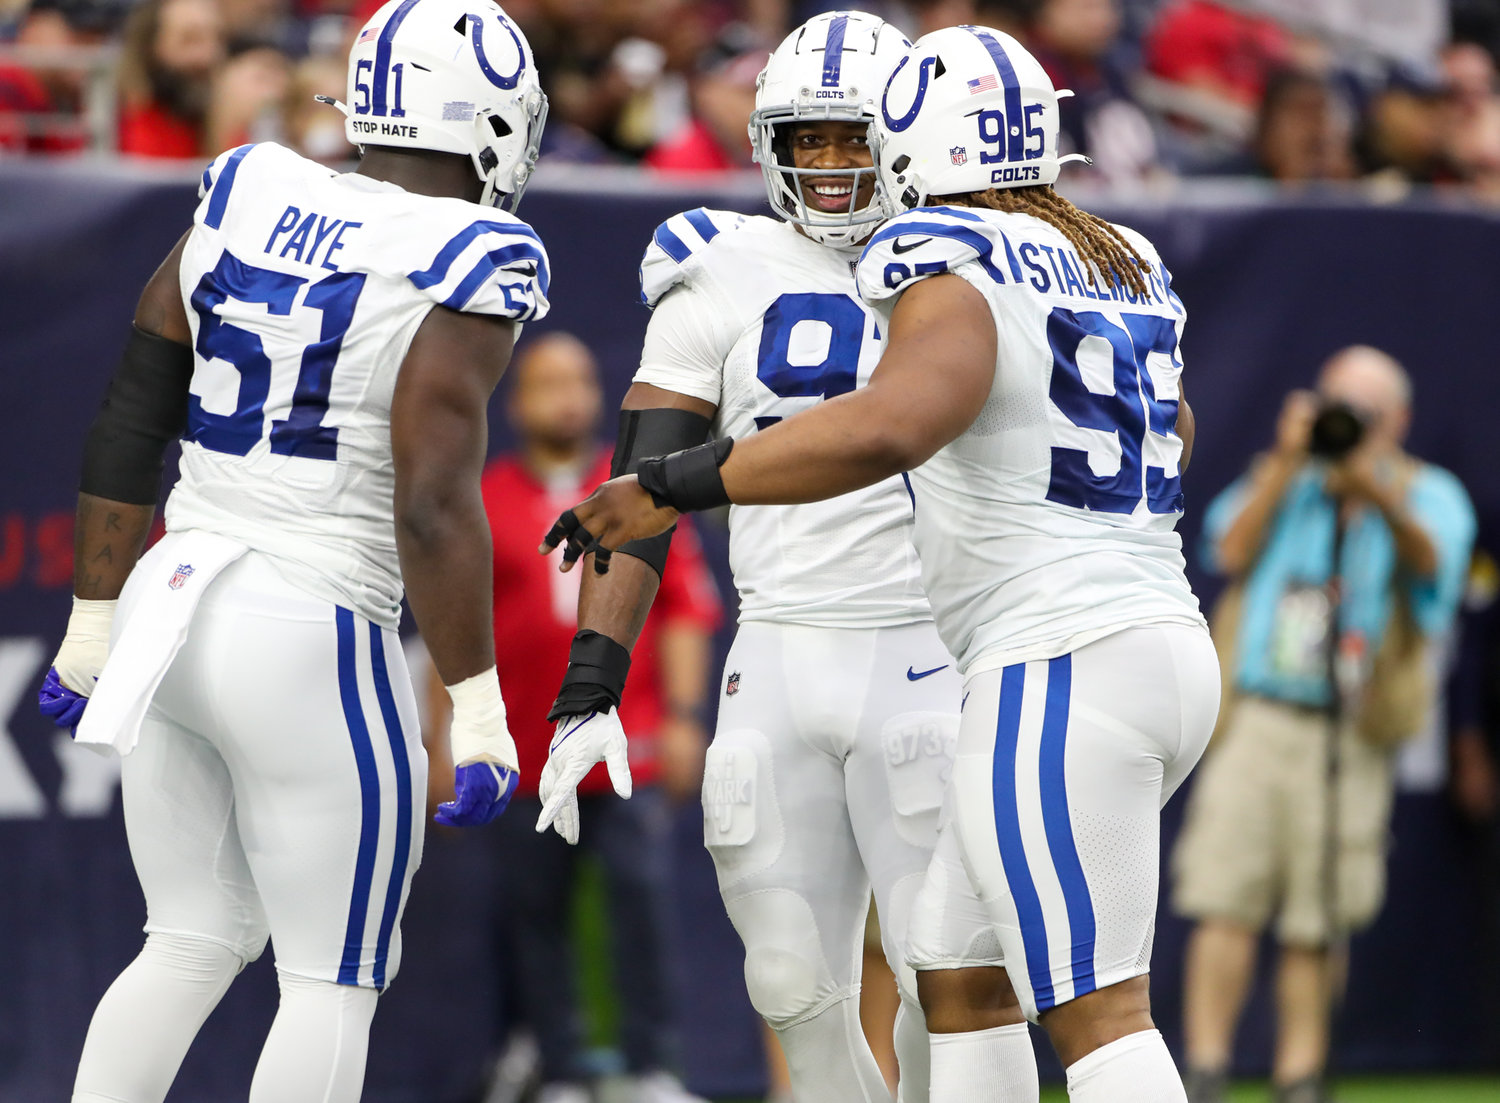 Indianapolis Colts defensive end Kwity Paye (51), defensive end Al-Quadin Muhammad (97) and defensive tackle Taylor Stallworth (95) celebrate after a sack during an NFL game between the Texans and the Colts on December 5, 2021 in Houston, Texas. The Colts won, 31-0.